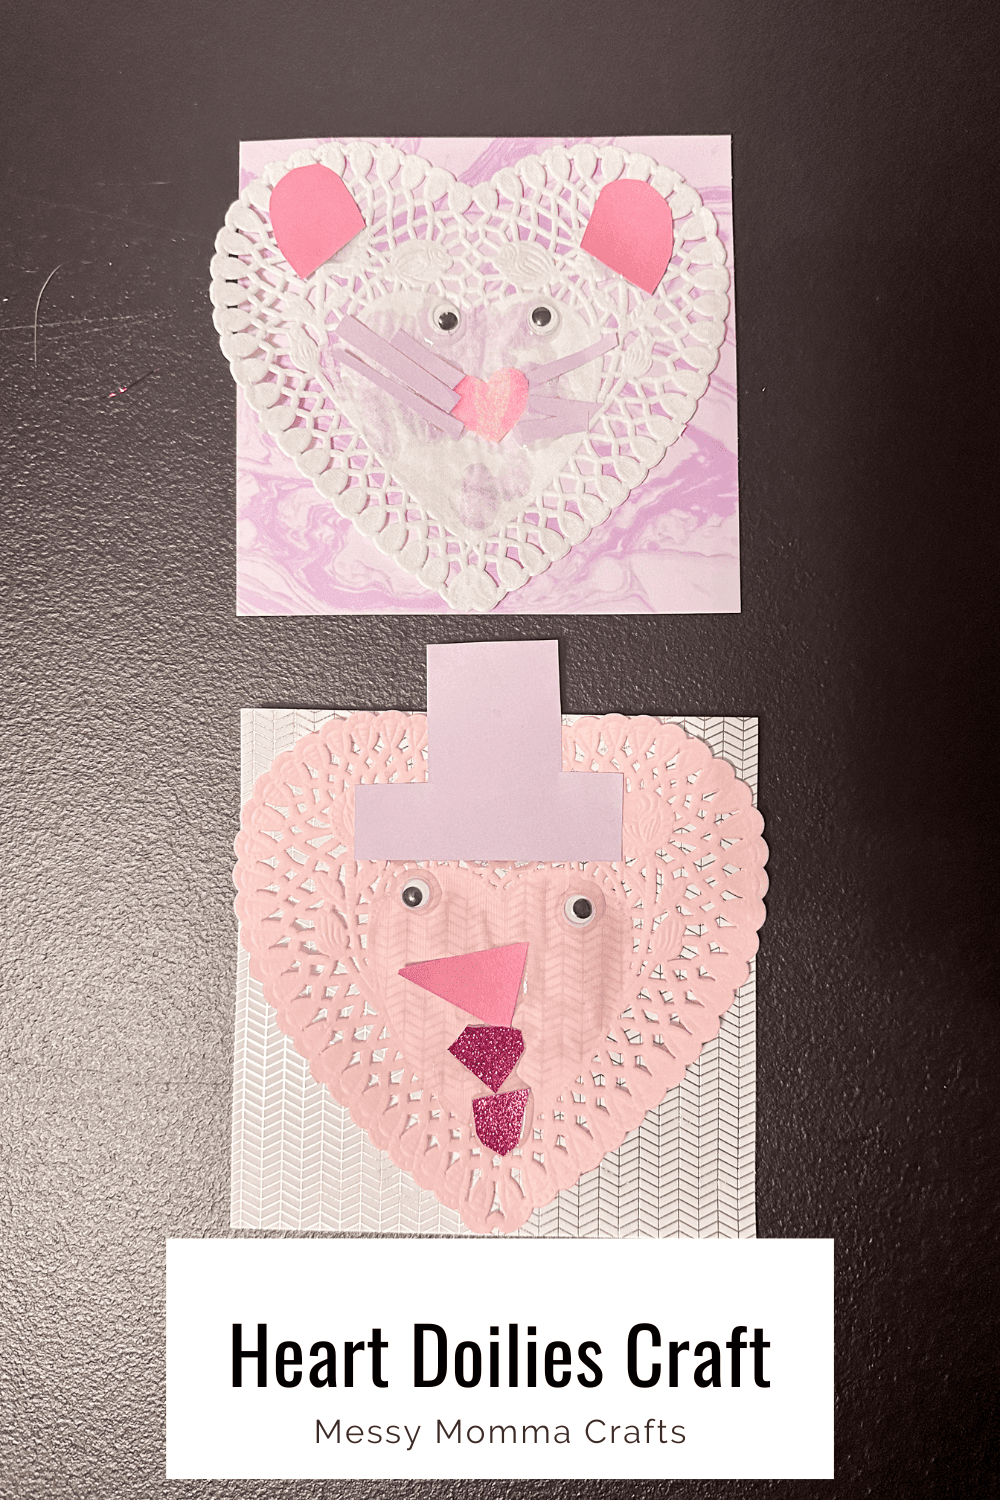 Heart doilies used to make a snowman with purple top hat; and a rat with cute pink ears, purple whiskers, and a pink felt heart nose.